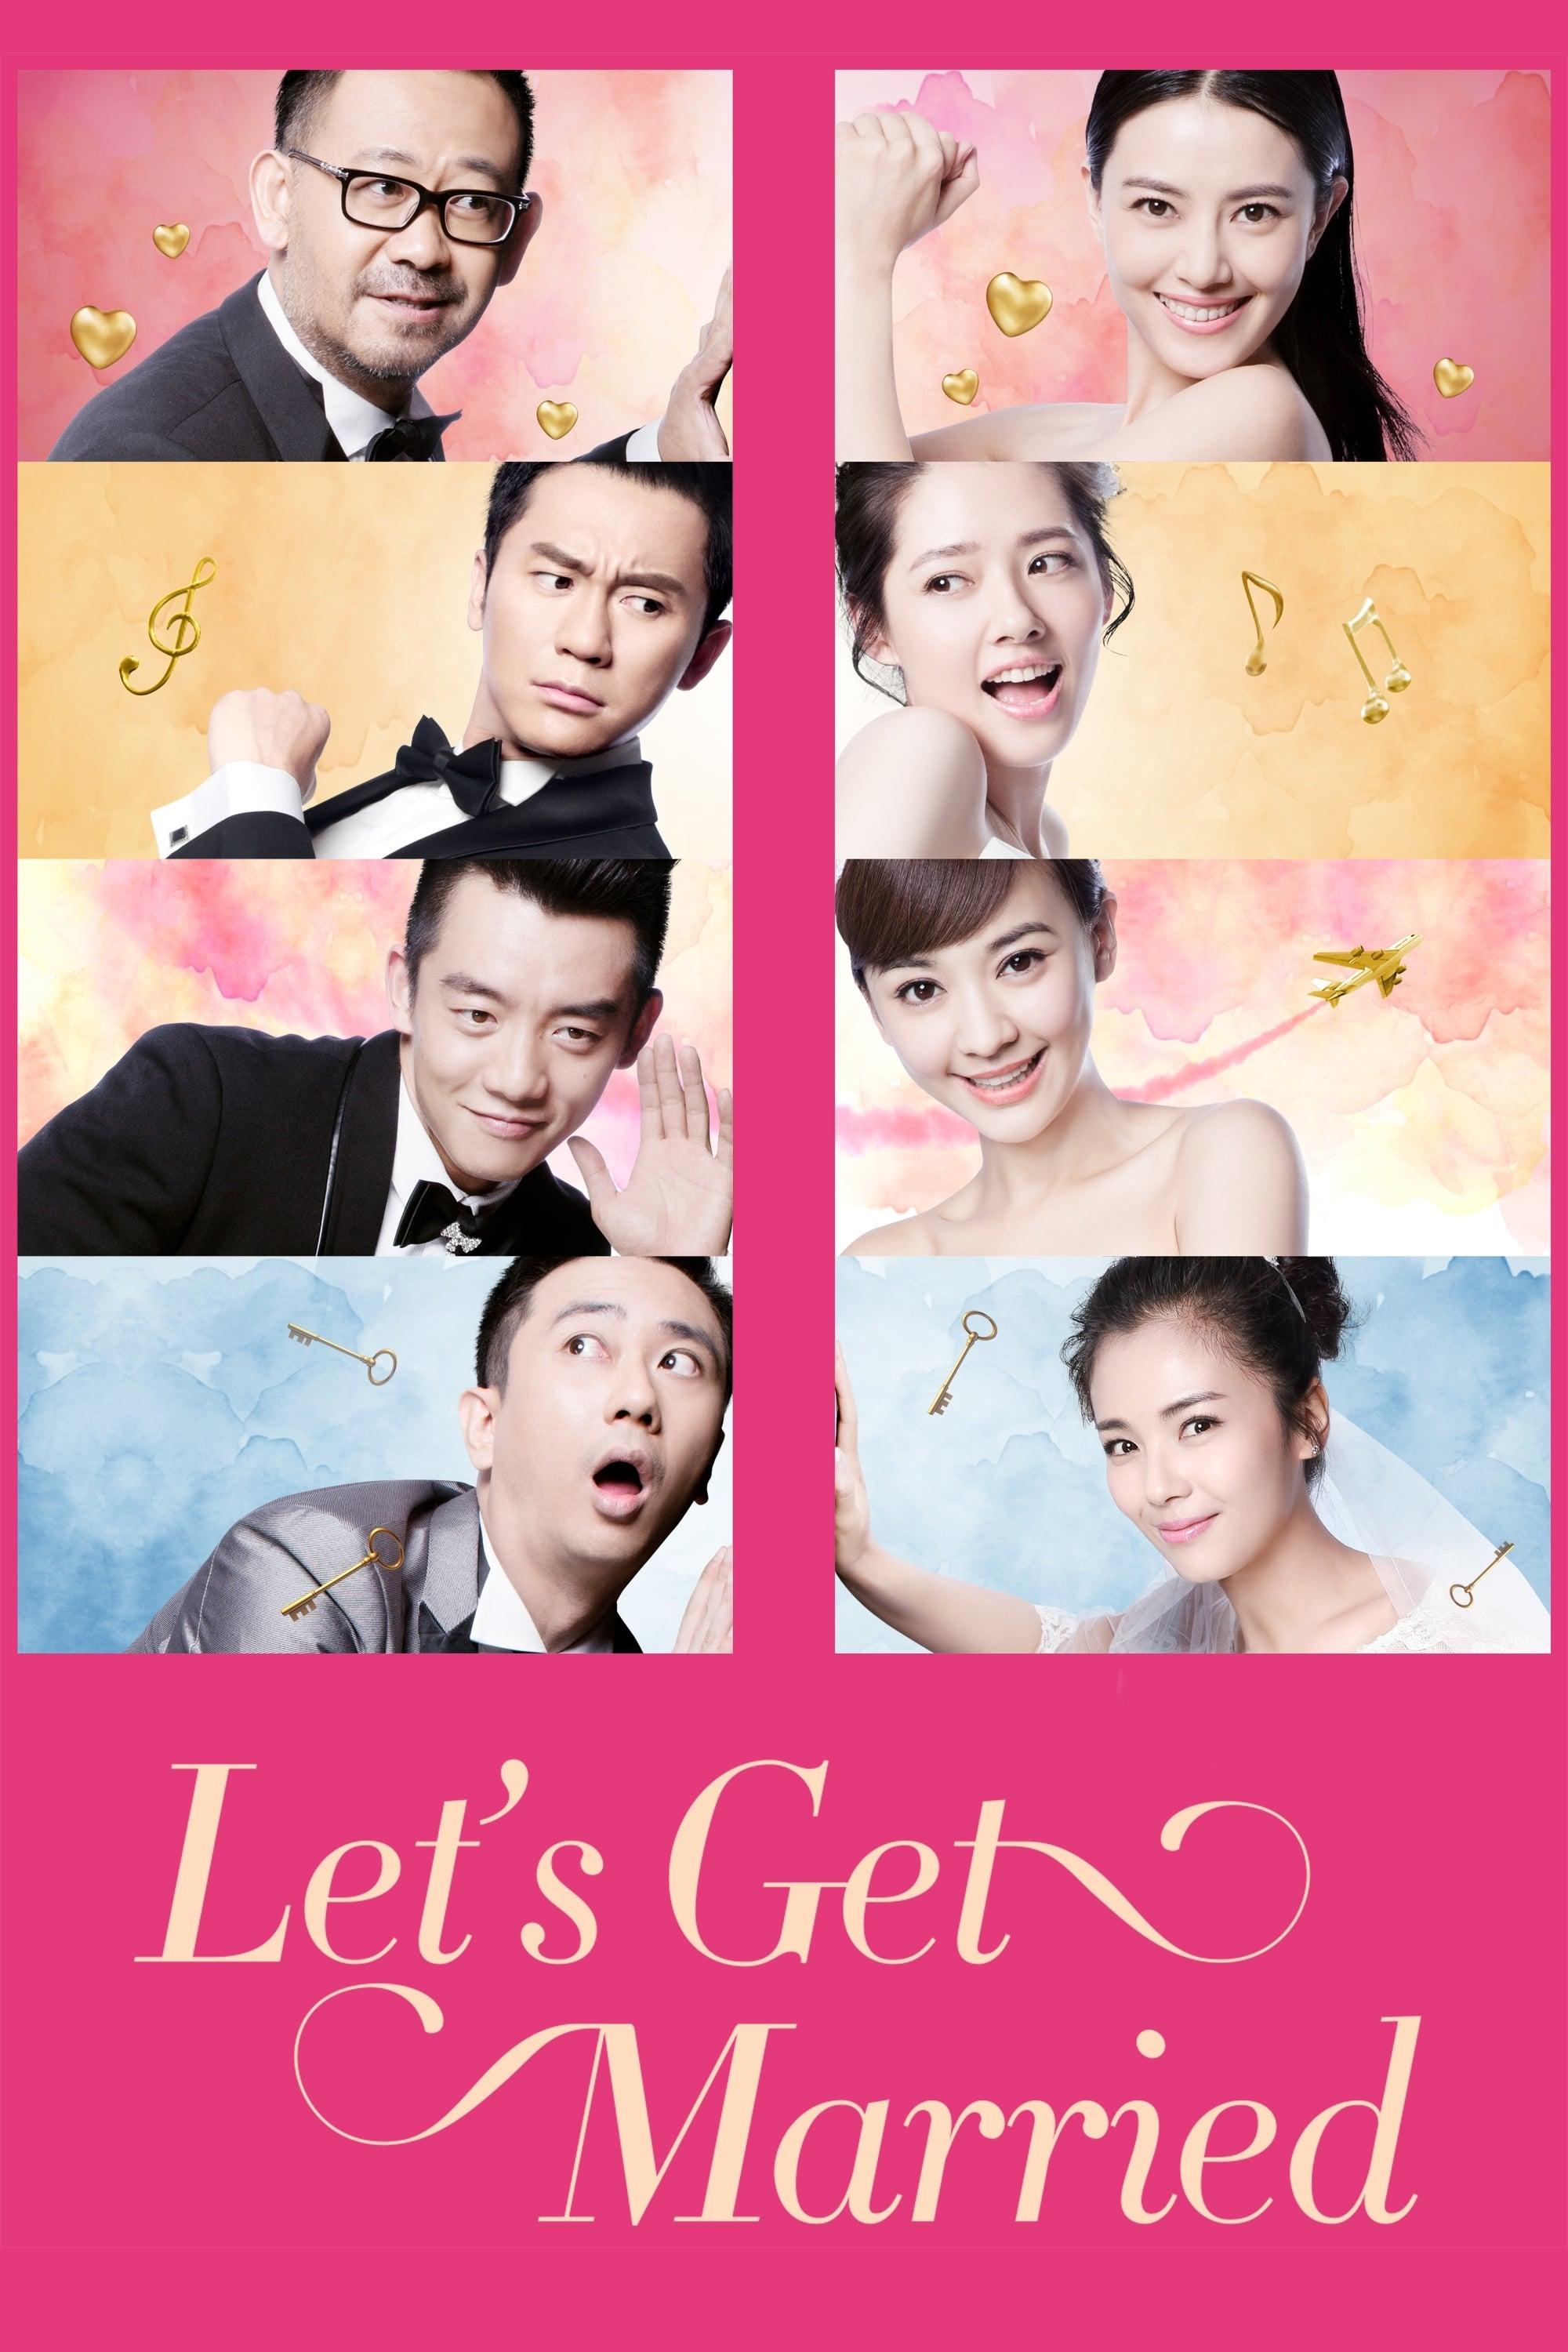 Let's Get Married poster